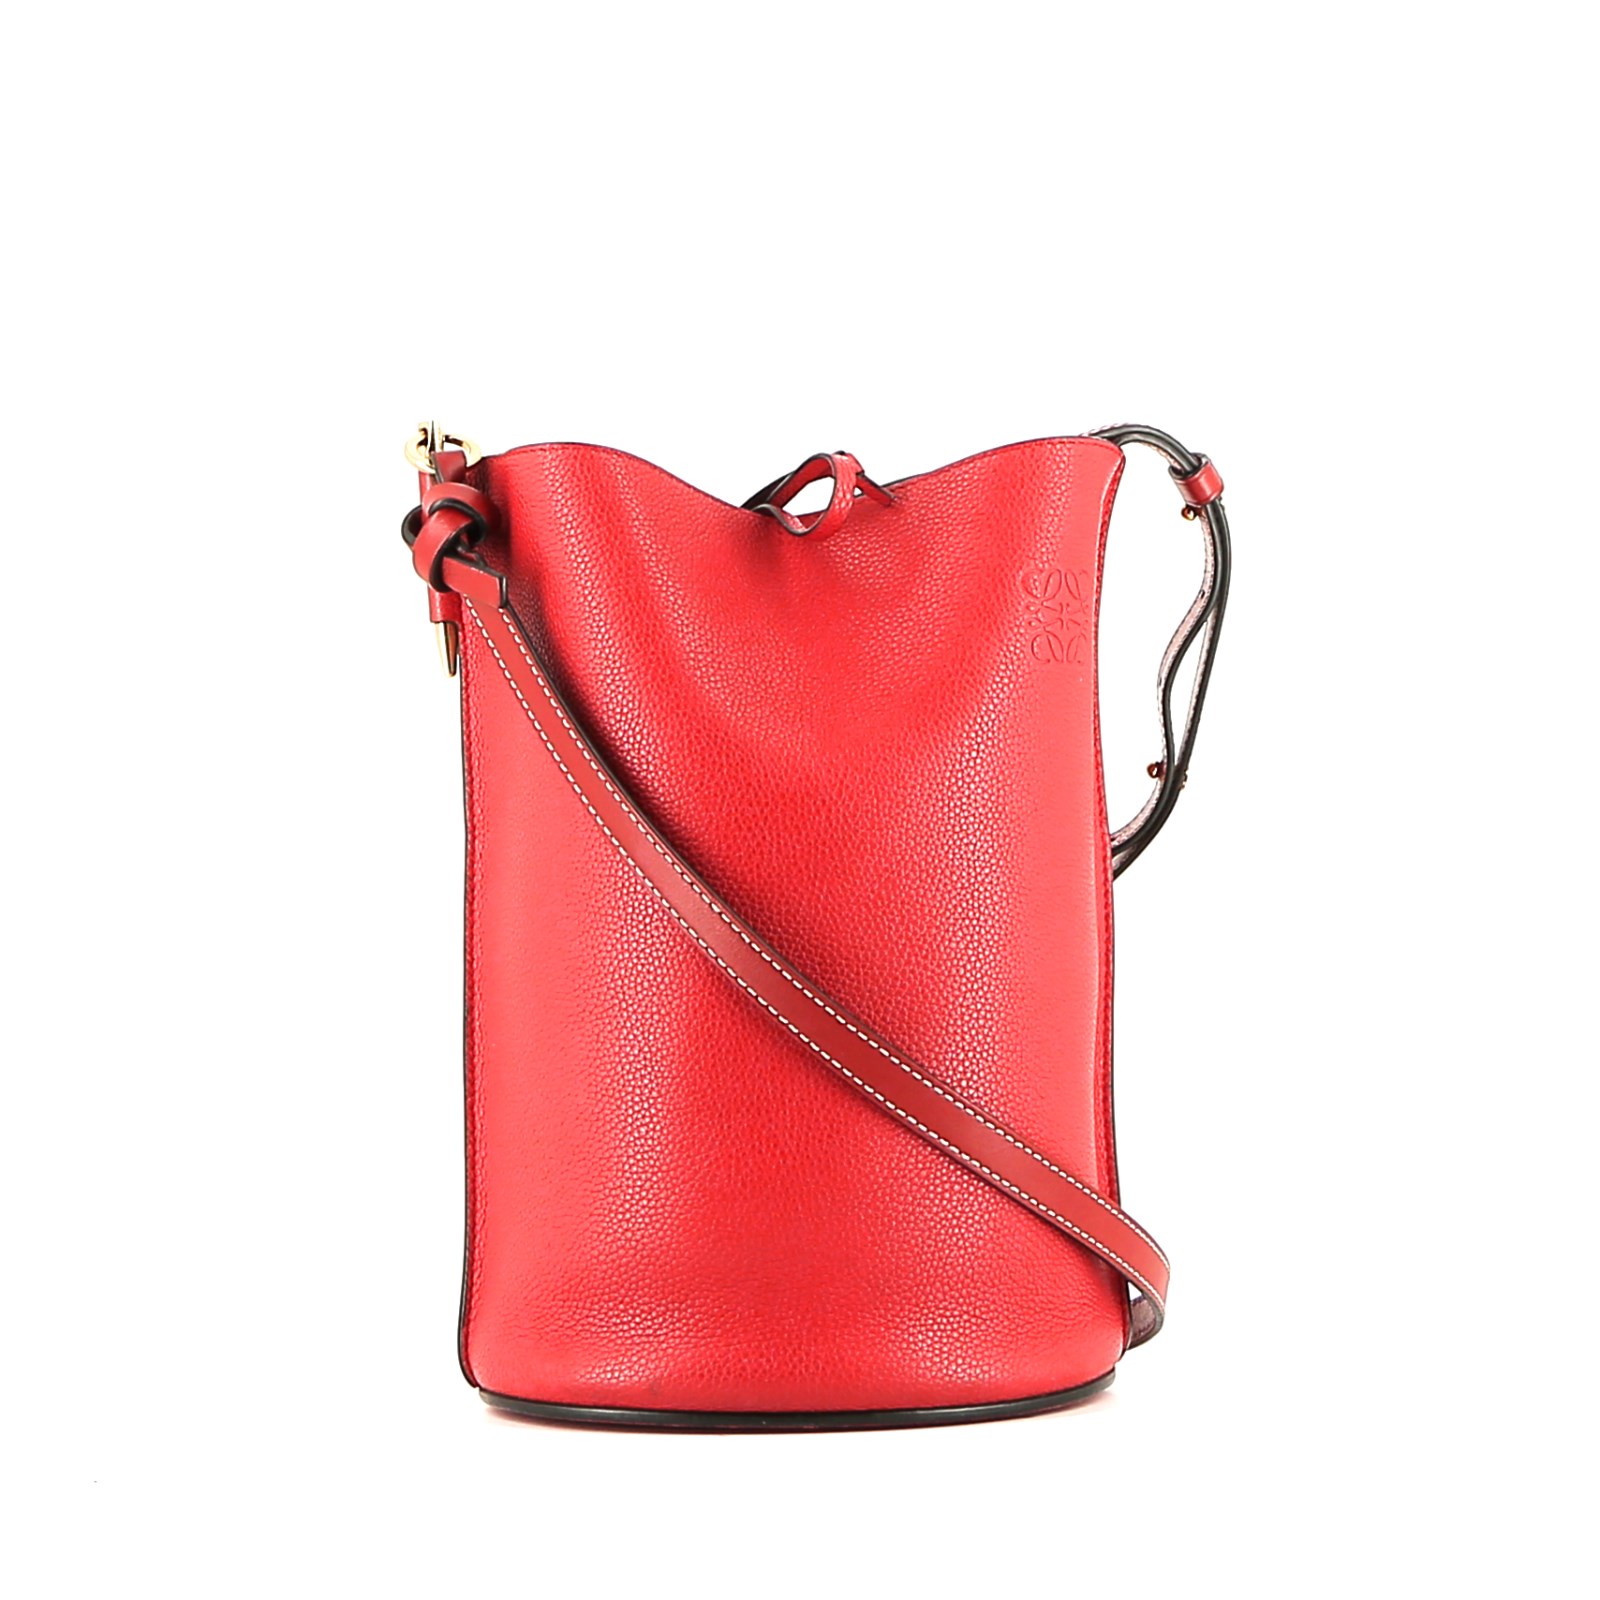 Gate Bag In Red Grained Leather